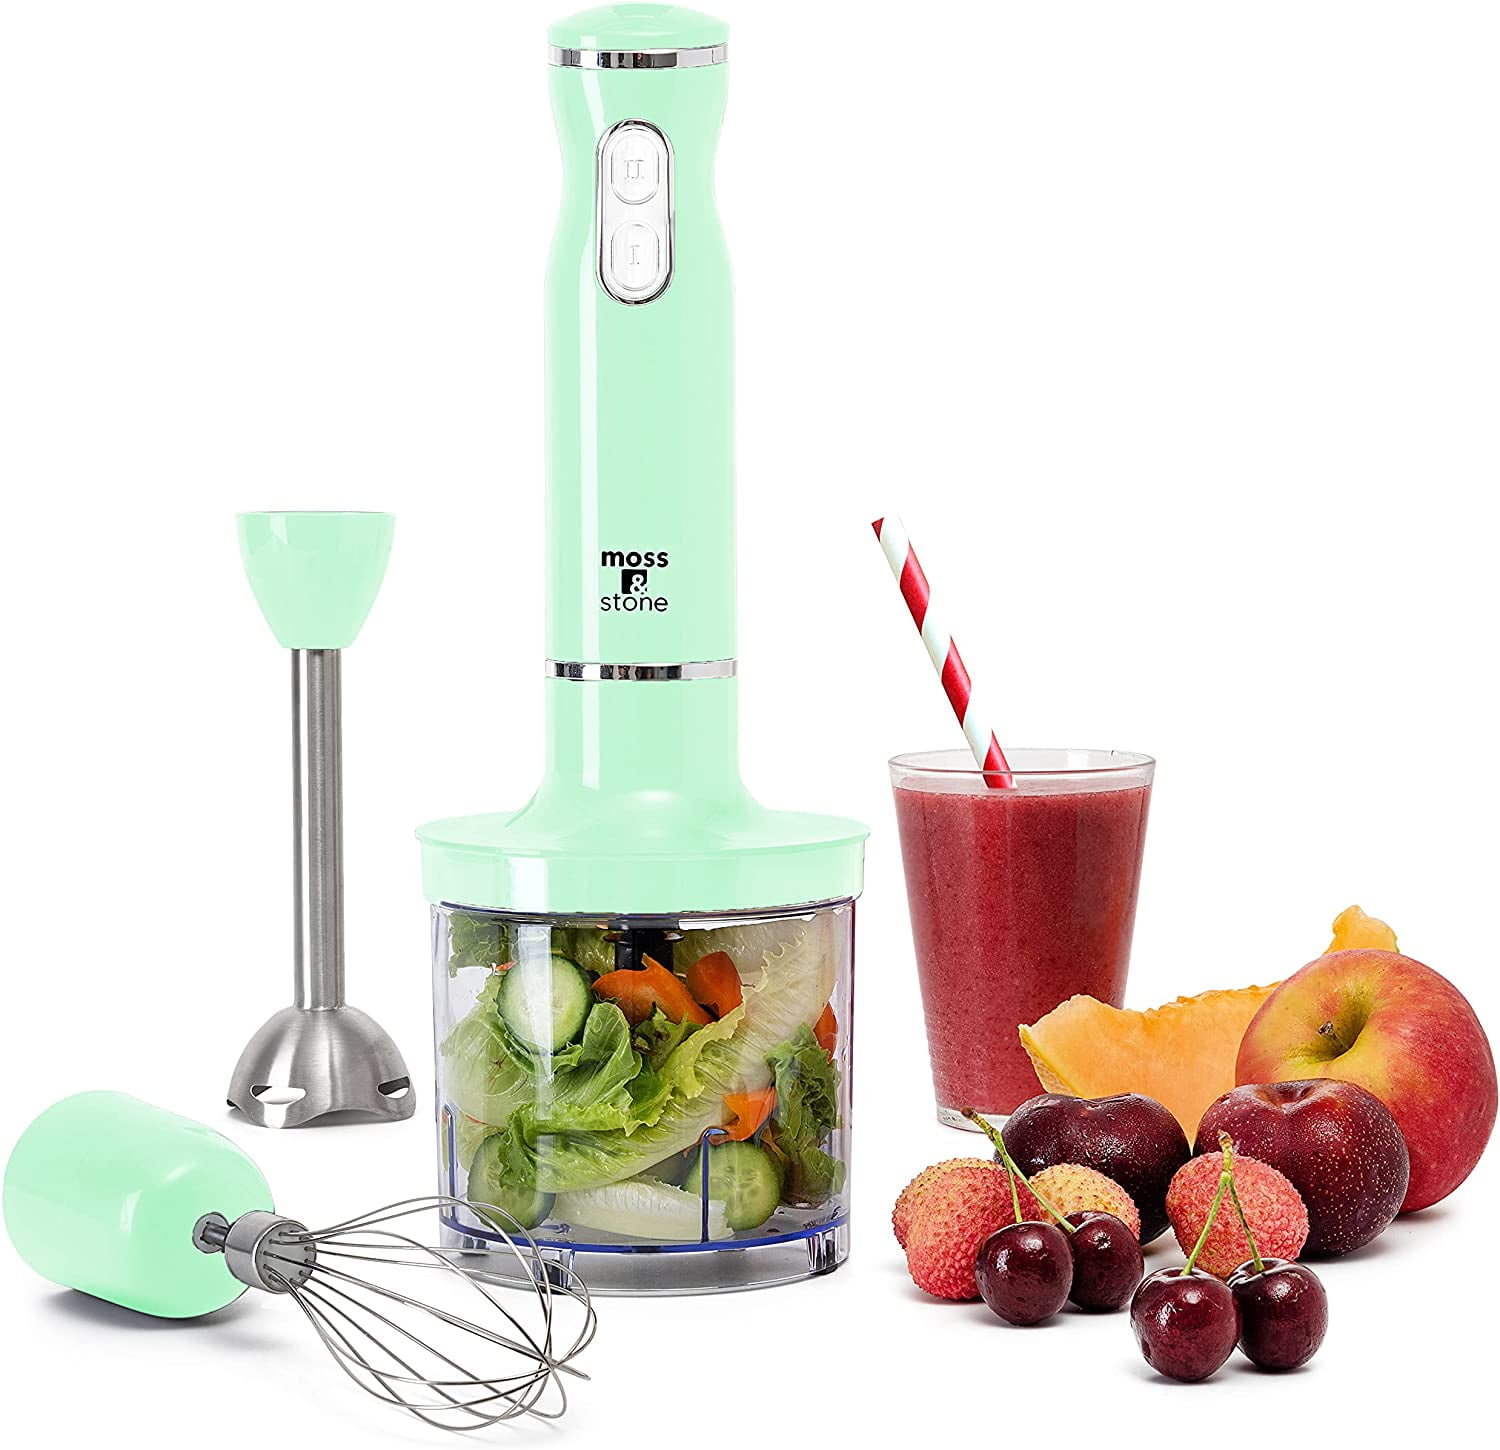 TESTED Working Crofton Wand Blender with Base Blender and Whisk